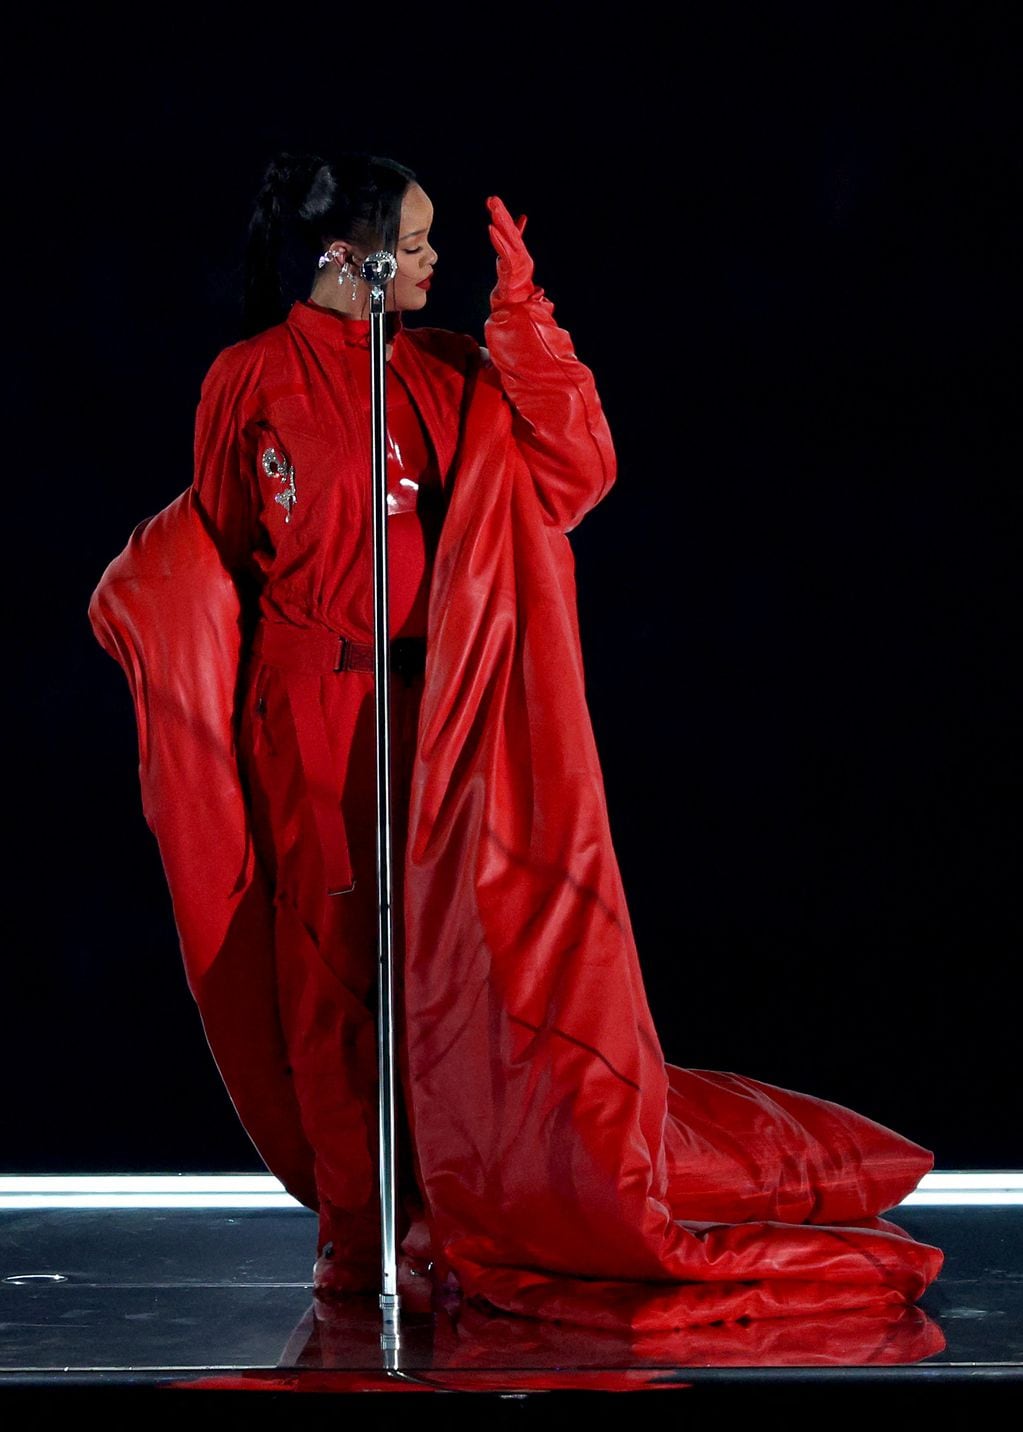 GLENDALE, ARIZONA - FEBRUARY 12: Rihanna performs onstage during the Apple Music Super Bowl LVII Halftime Show at State Farm Stadium on February 12, 2023 in Glendale, Arizona.   Rob Carr/Getty Images/AFP (Photo by Rob Carr / GETTY IMAGES NORTH AMERICA / Getty Images via AFP)